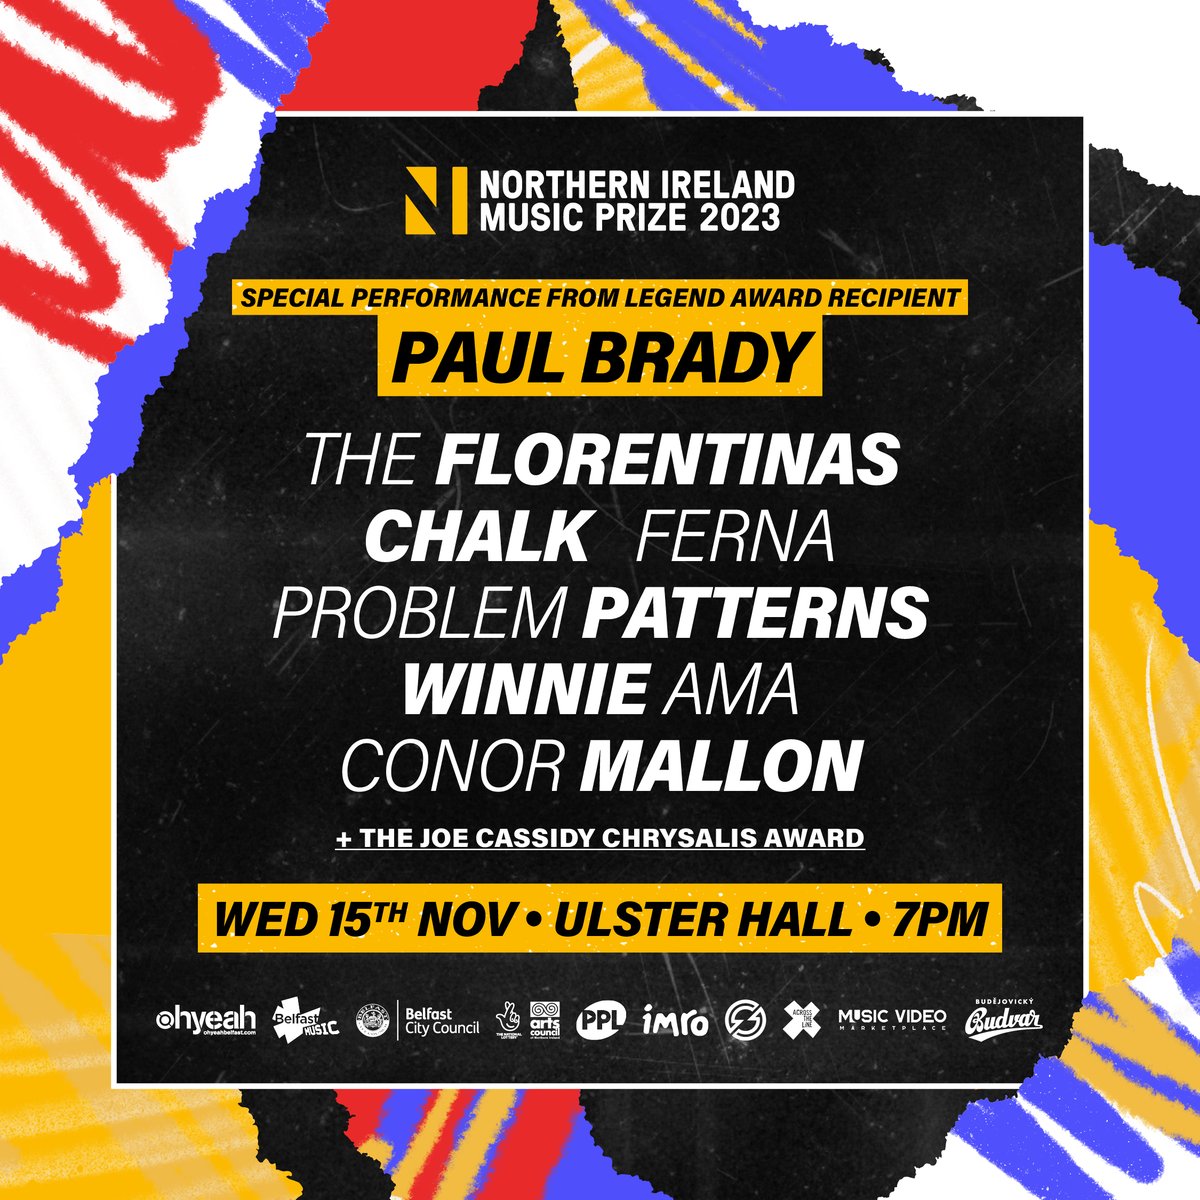 The @NIMusicPrize 2023 takes place at the @UlsterHall tomorrow. We are excited to be heading back to Belfast for the ceremony and to celebrate Northern Irish Music. See you there. nimusicprize.com